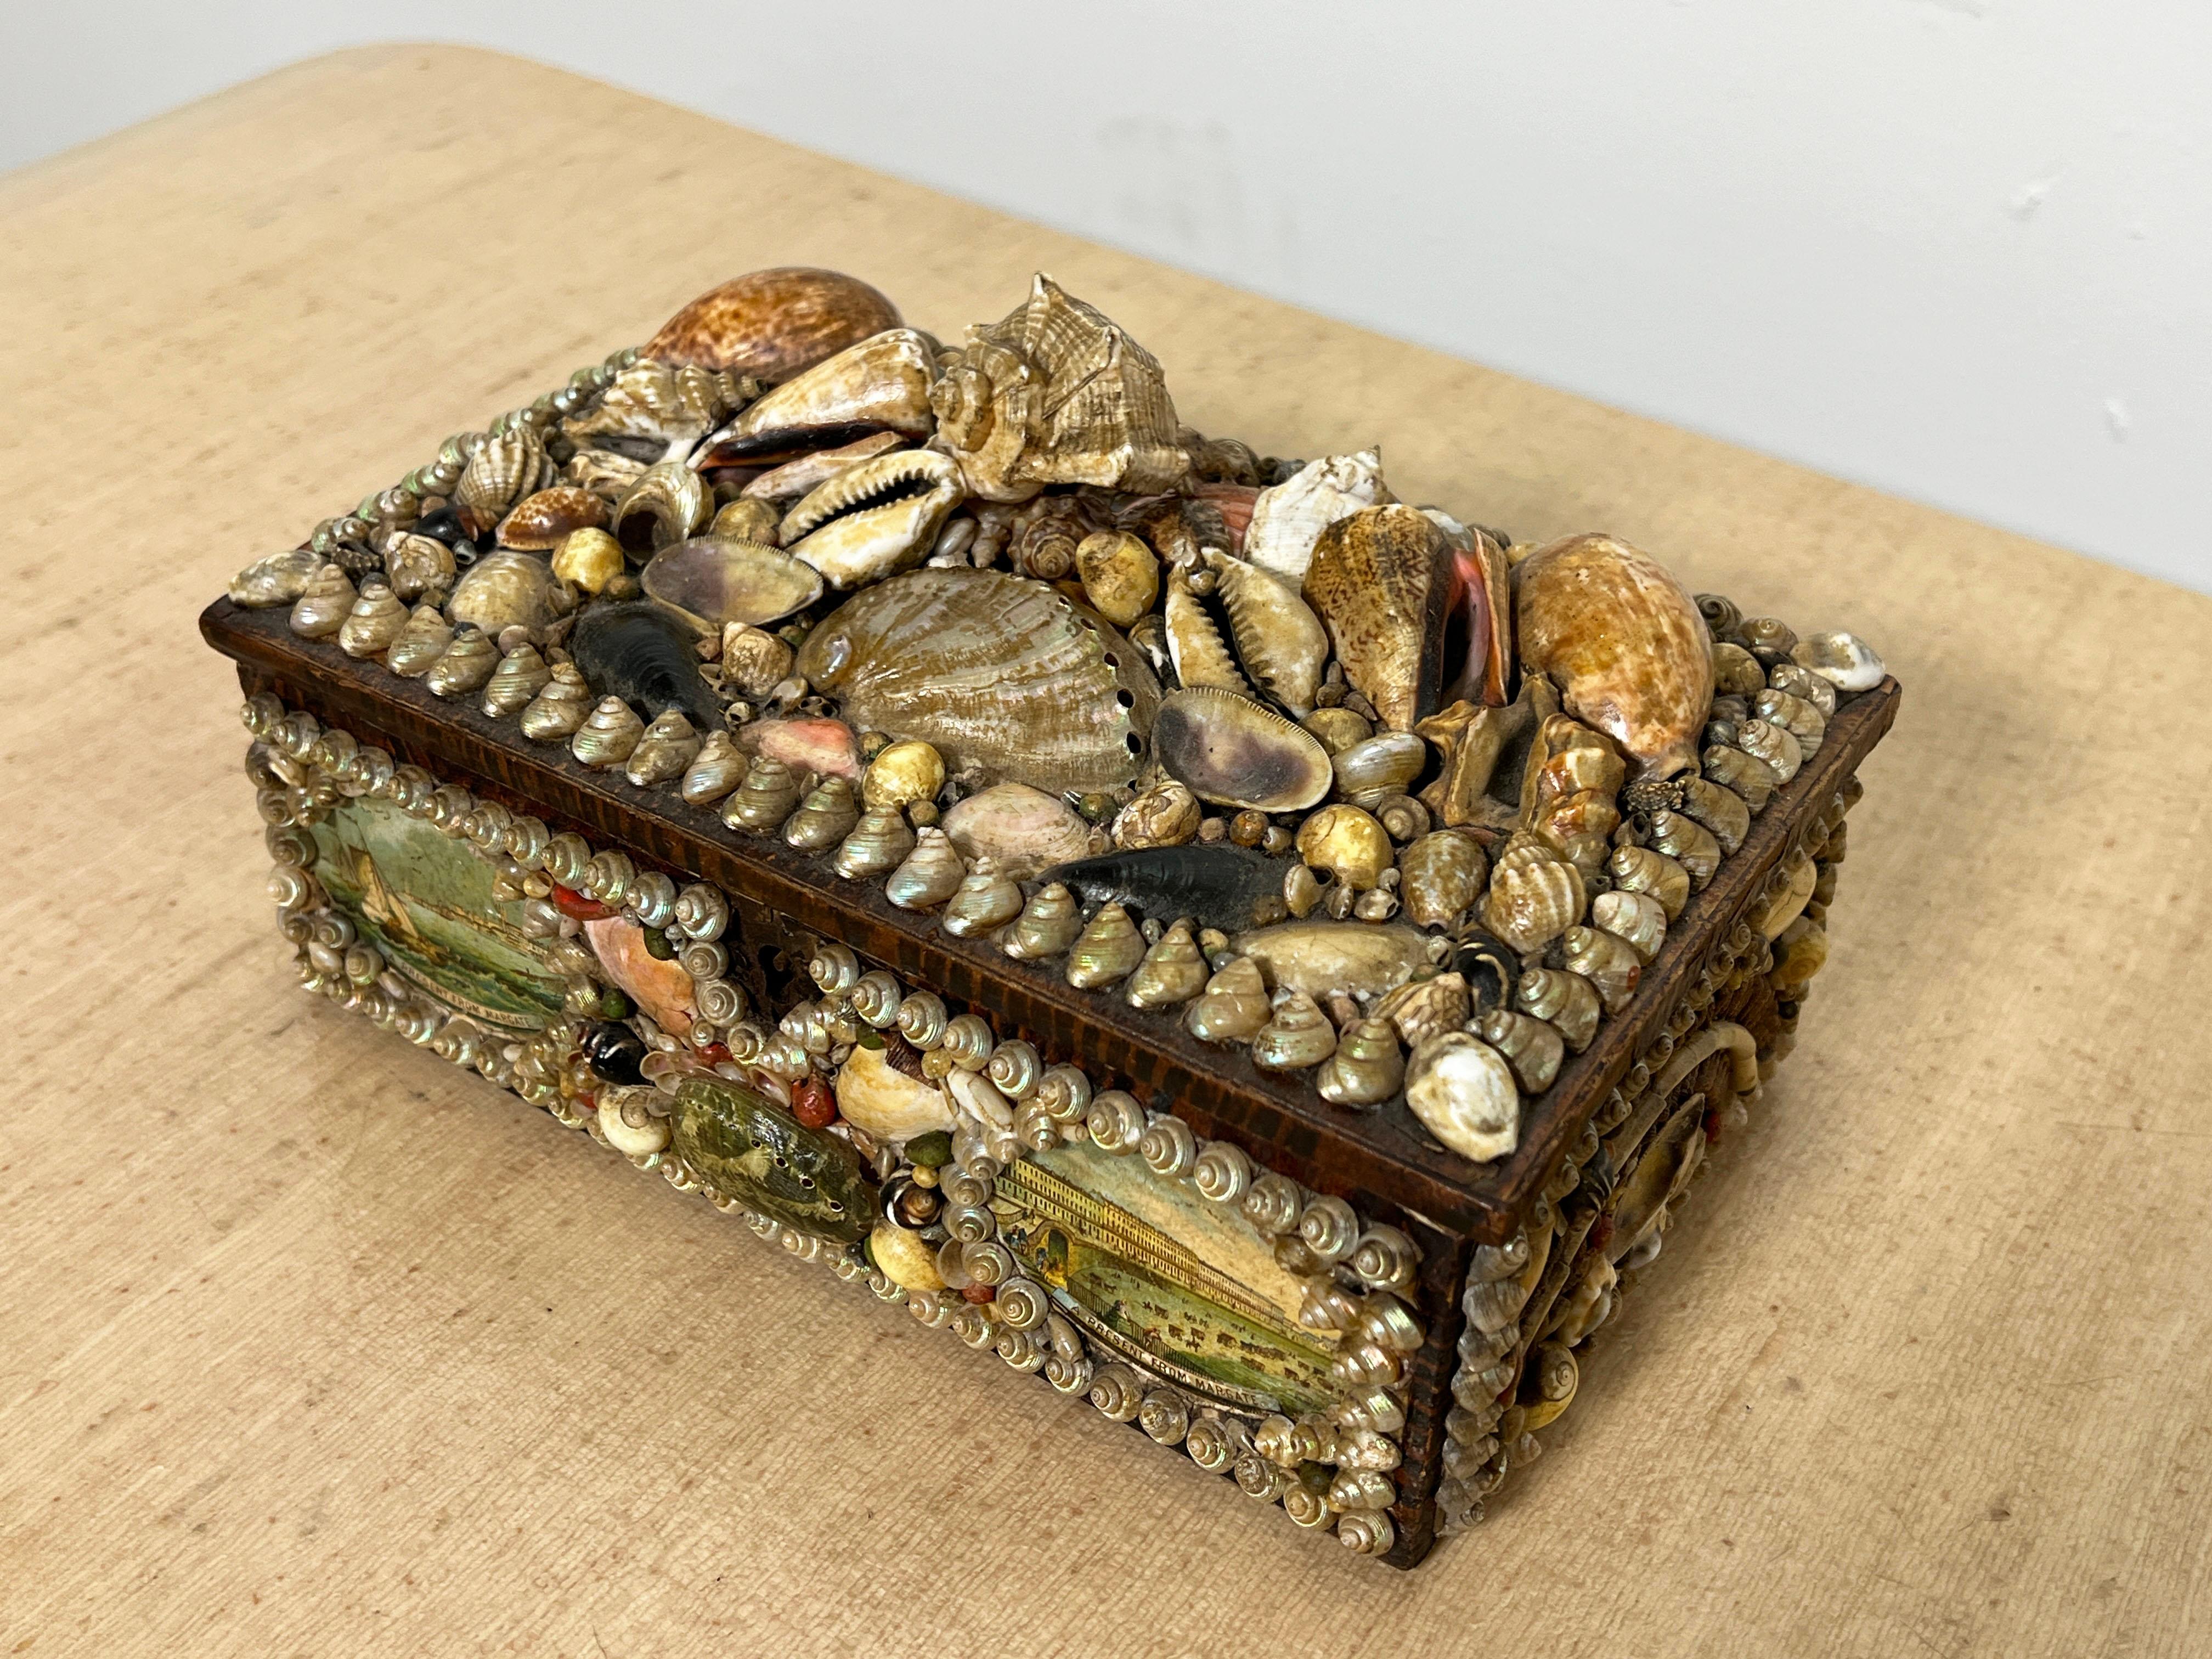 Late 19th Century Victorian Era Margate Grotto England Seashell and Painted Souvenir Trinket Box